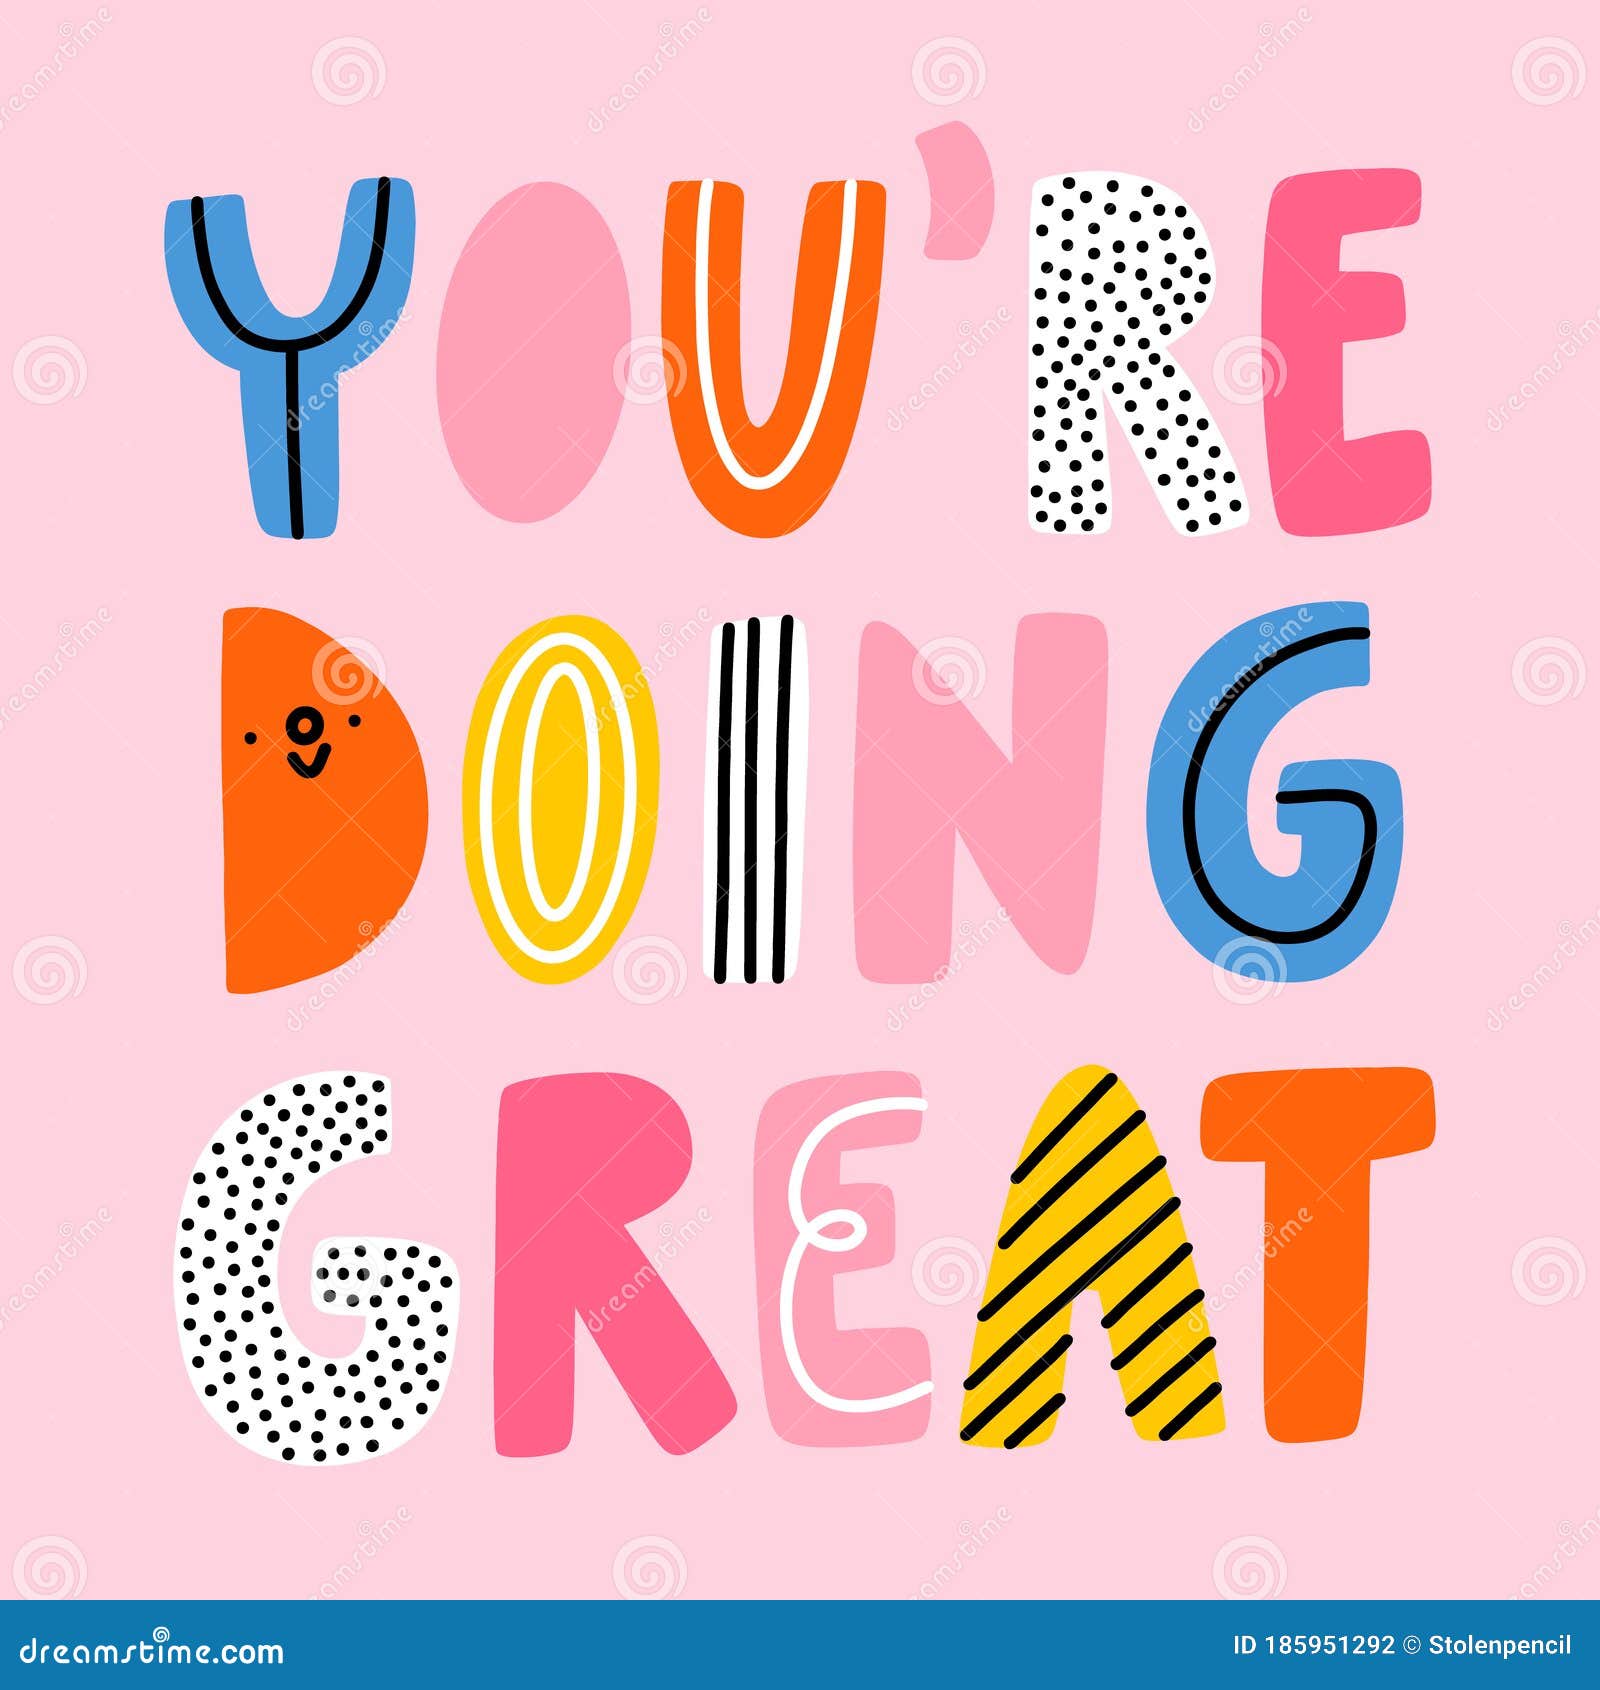 you are doing great,  